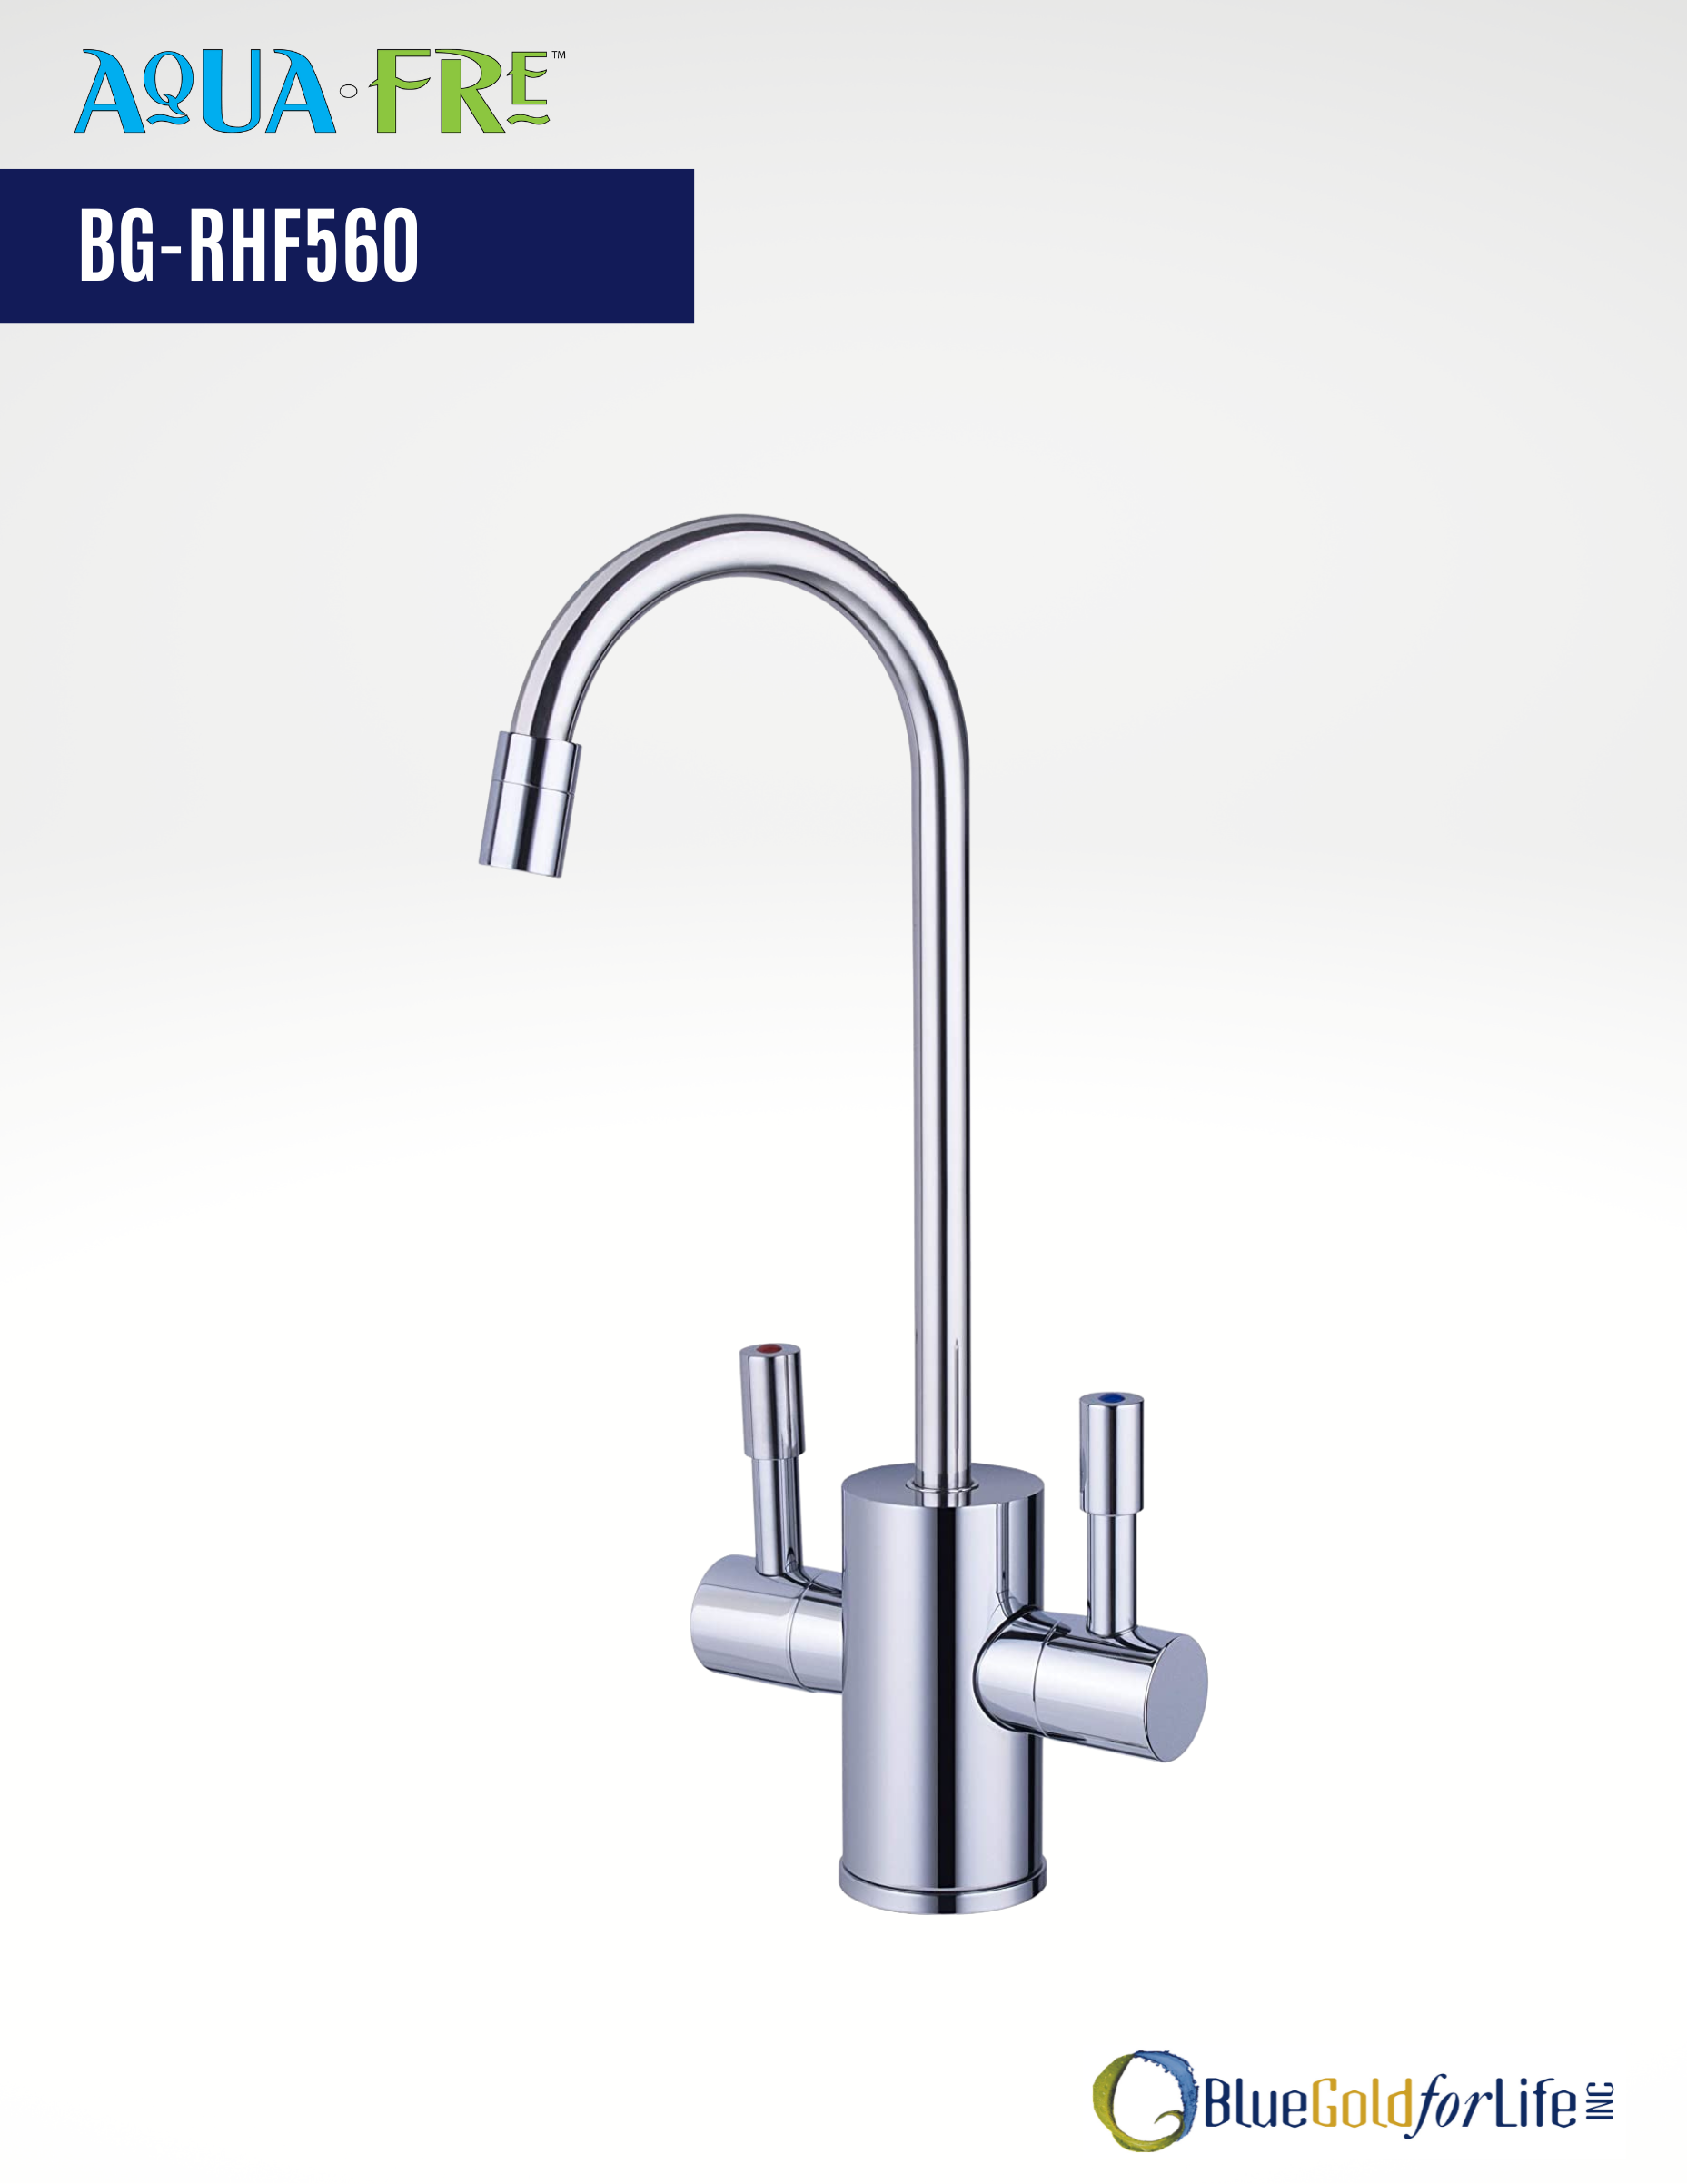 Brushed Nickel European High Spout Drinking Water Faucet